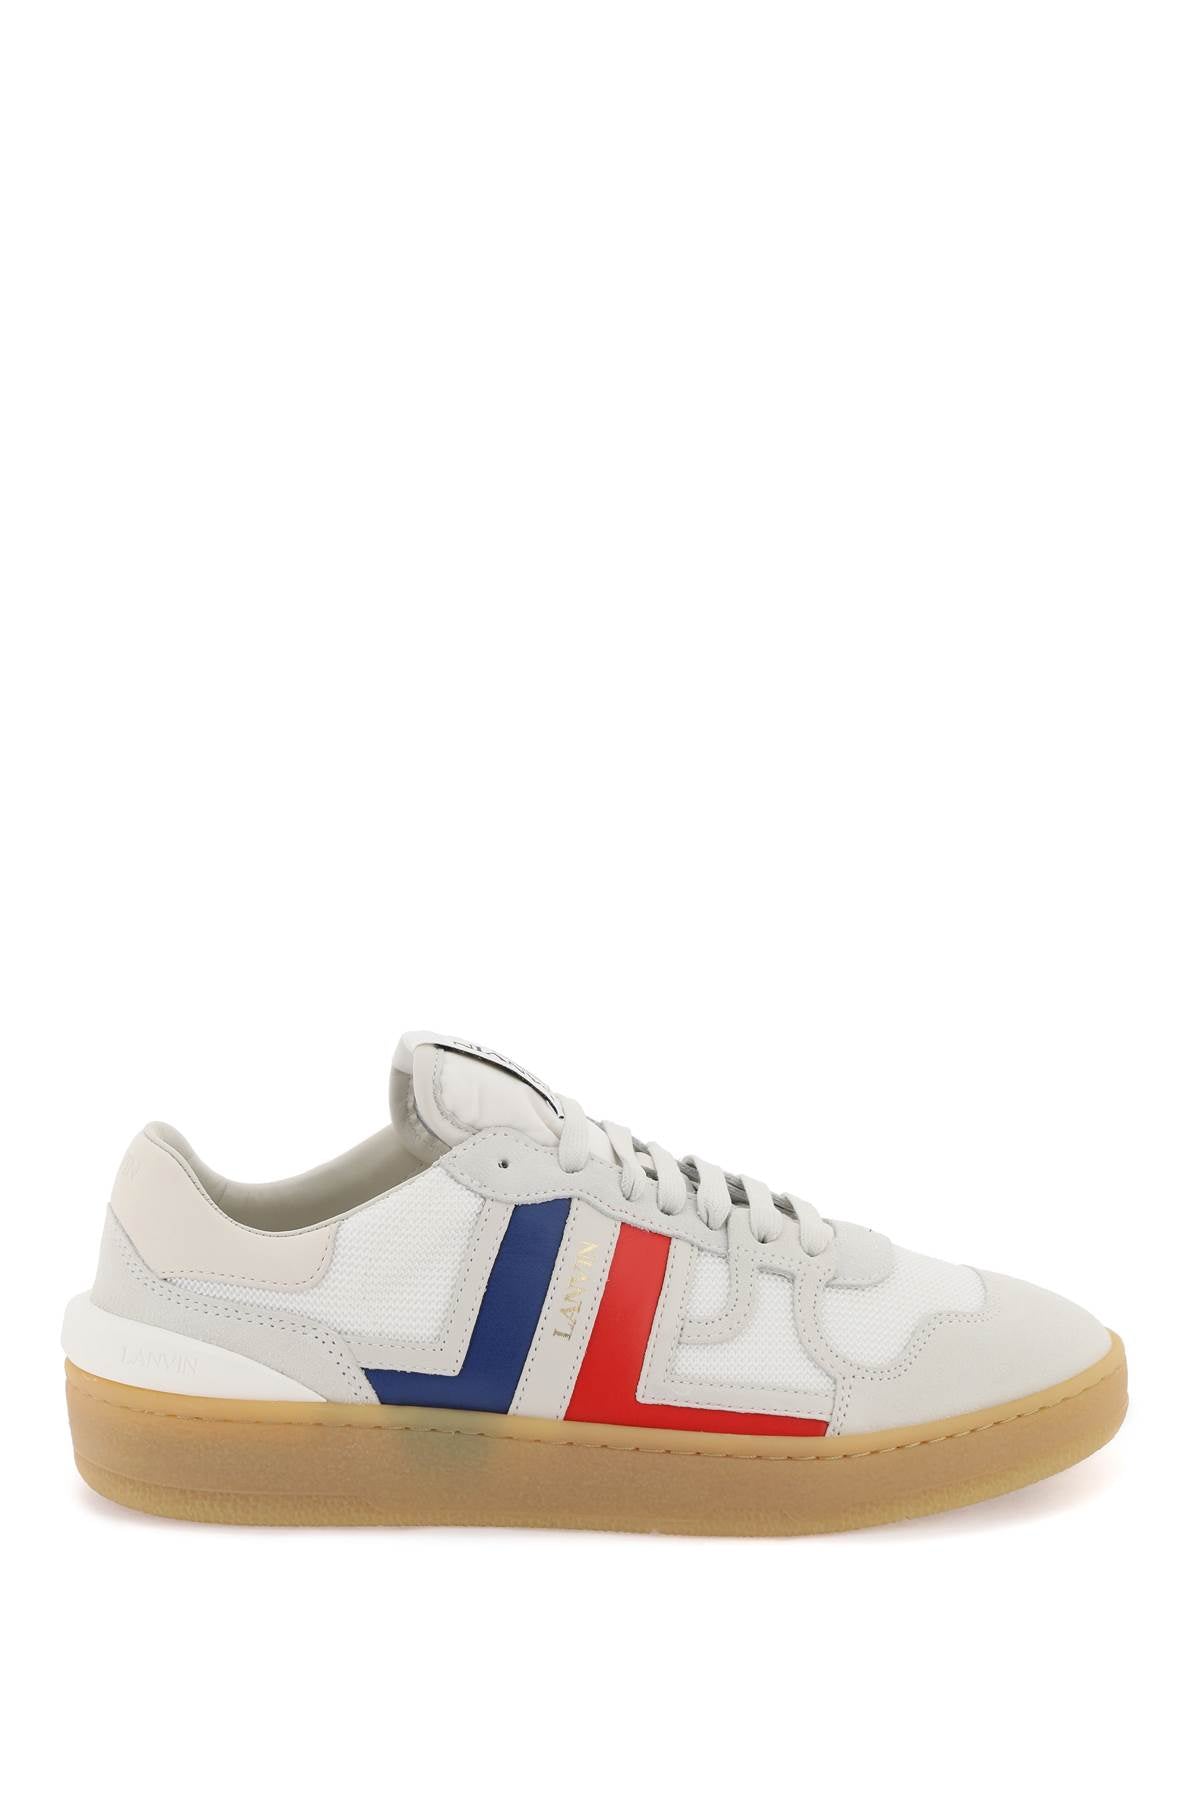 LANVIN Multicolor Women's Sneakers - Leather, Suede & Technical Fabric with JL Monogram